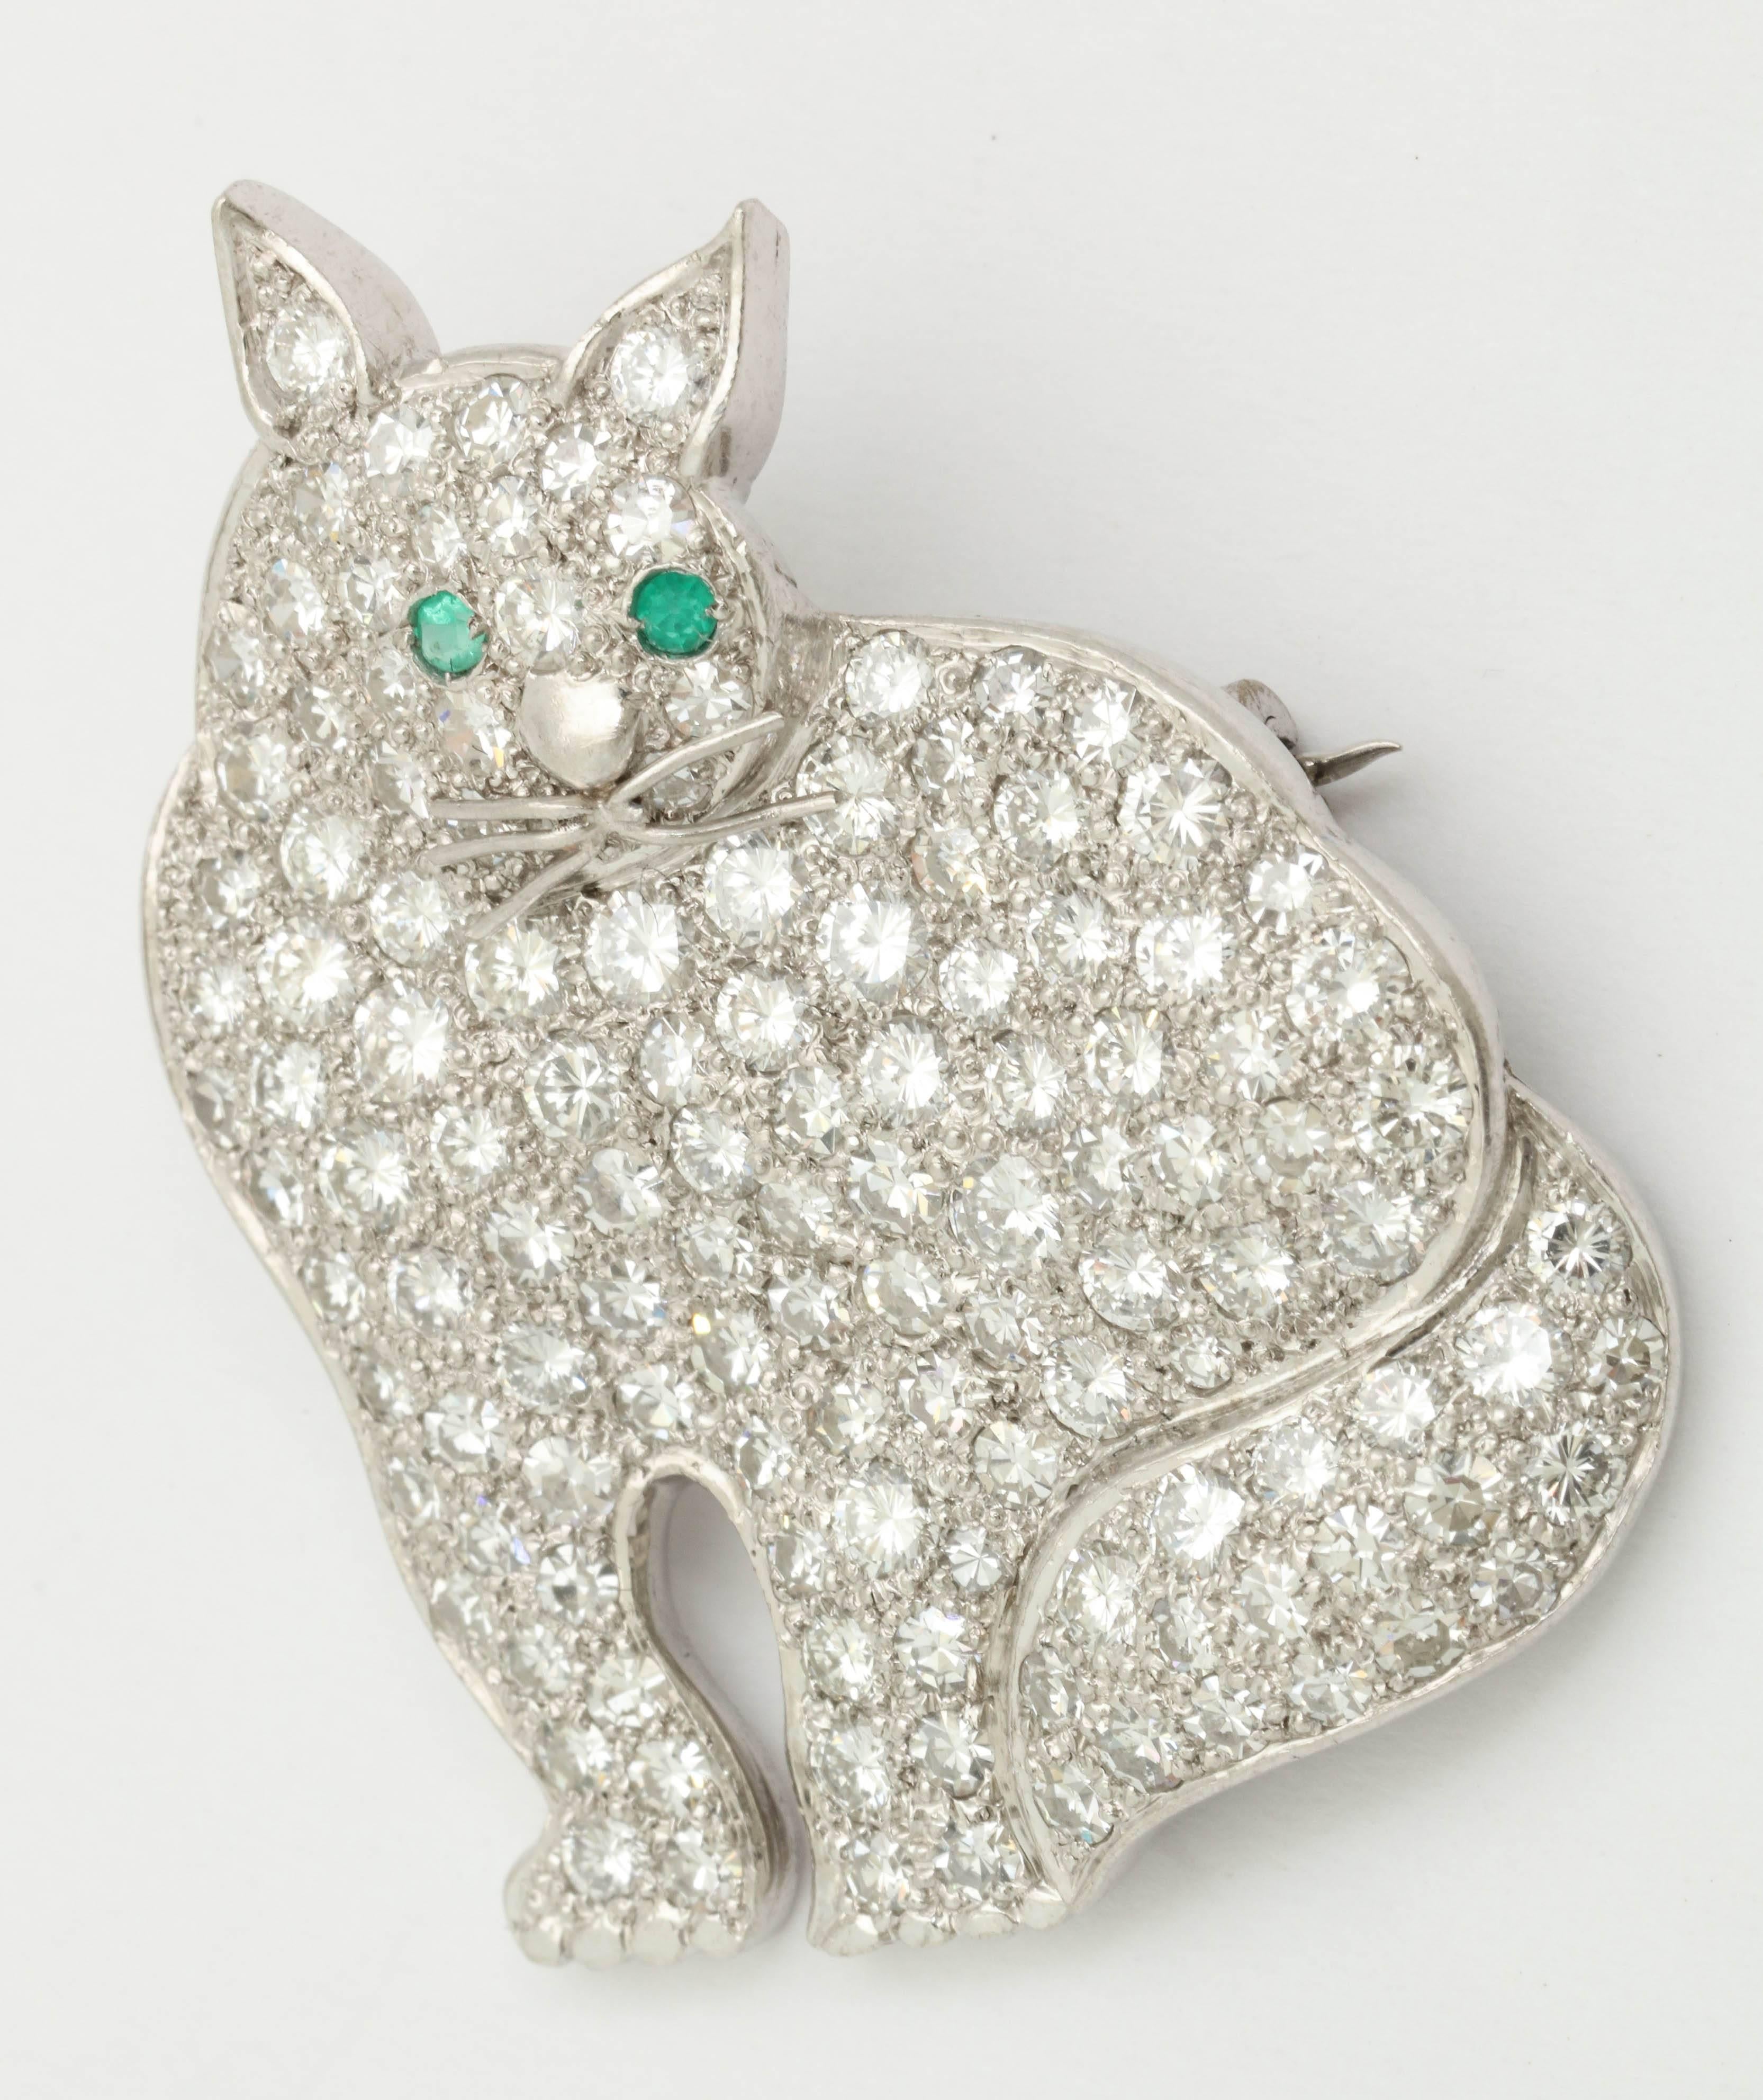 One Super Kitty Cat Brooch Embellished With Numerous High Quality Antique Cut Diamonds Weighing Approximately 6 carats Total Weight. Further Decorated With 2 Faceted Emeralds For Eyes.Further designed with Platinum Hand-Made Whiskers & nose.